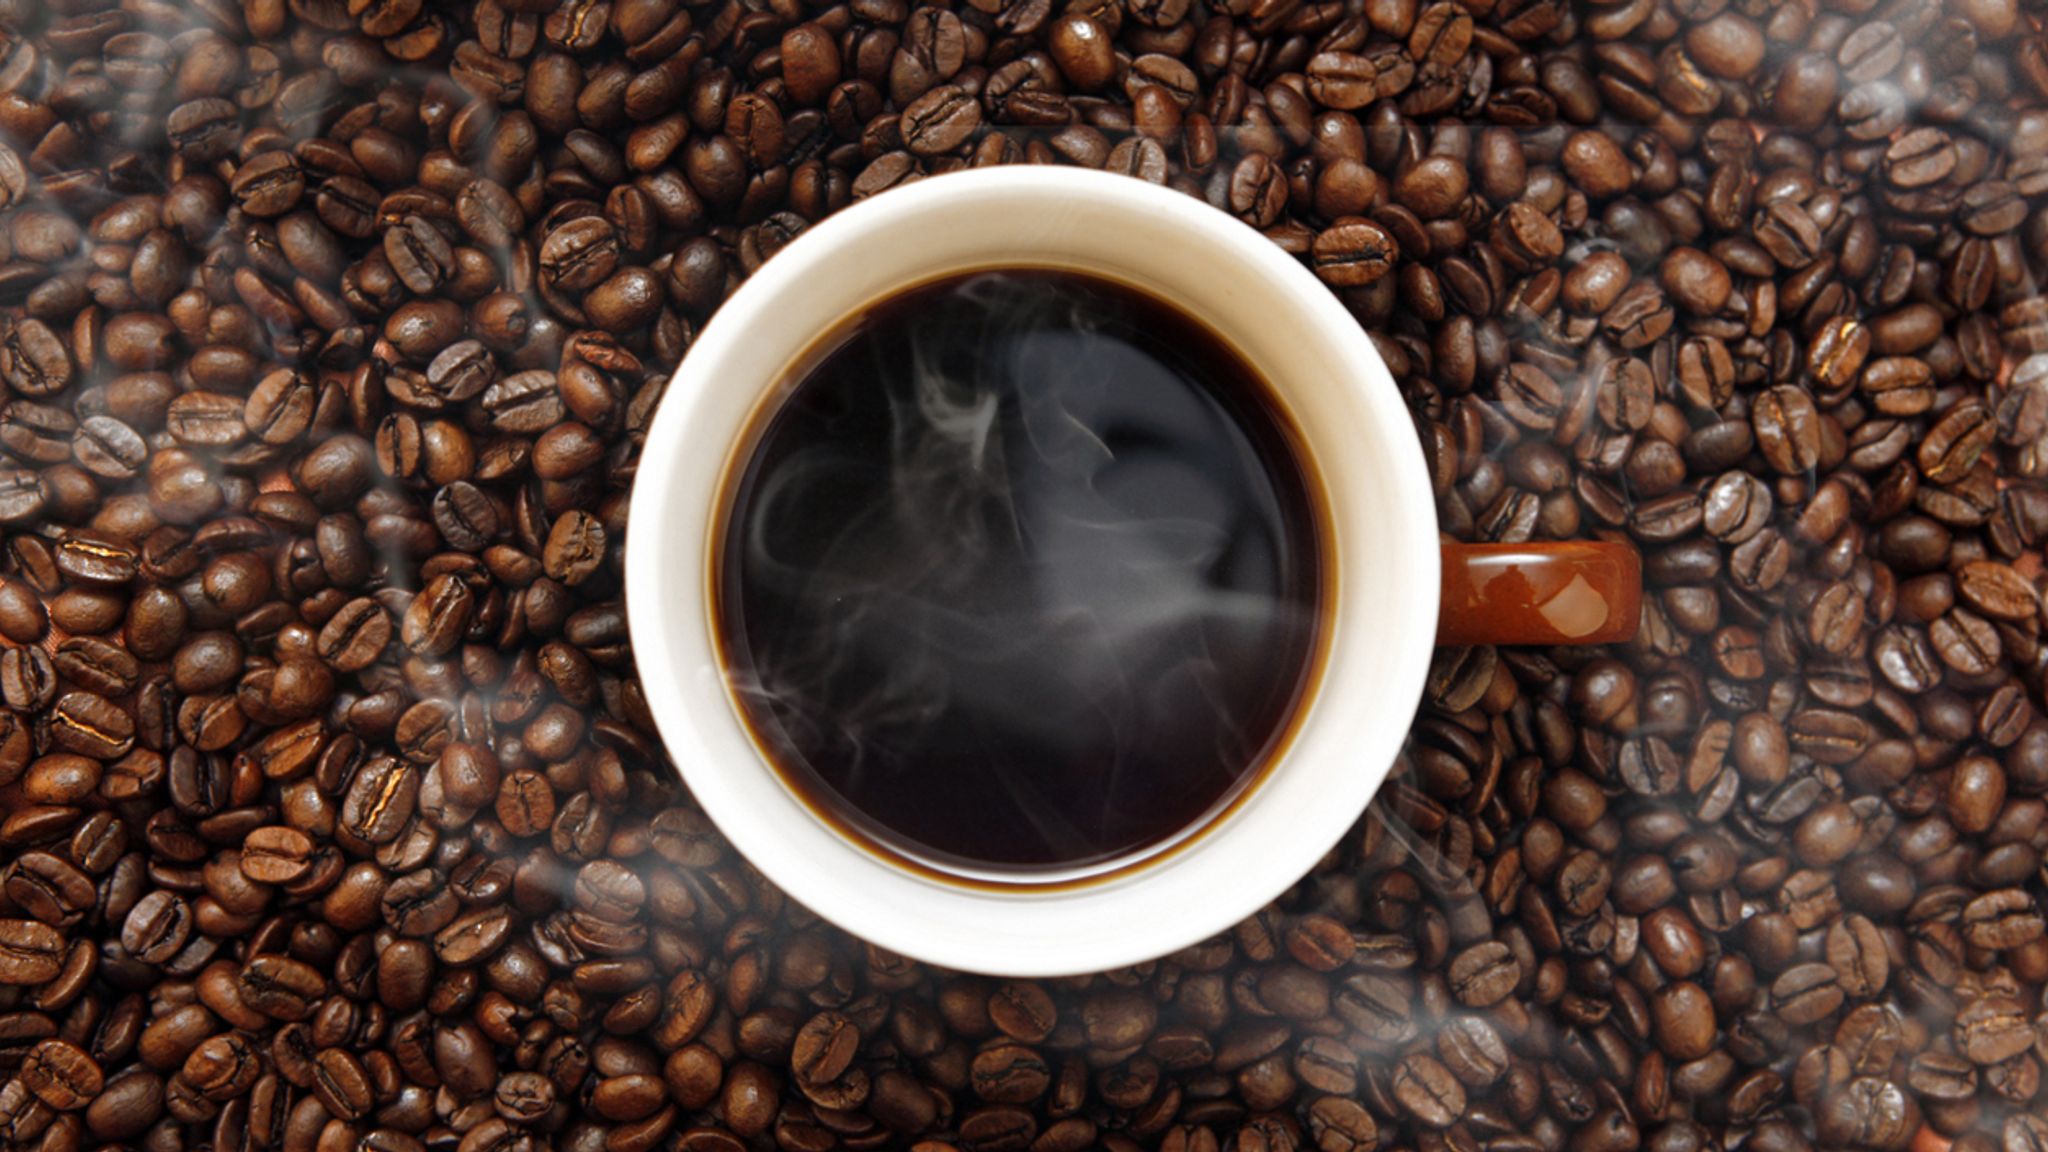 Your Morning Coffee May Have a Placebo Effect, Research Finds